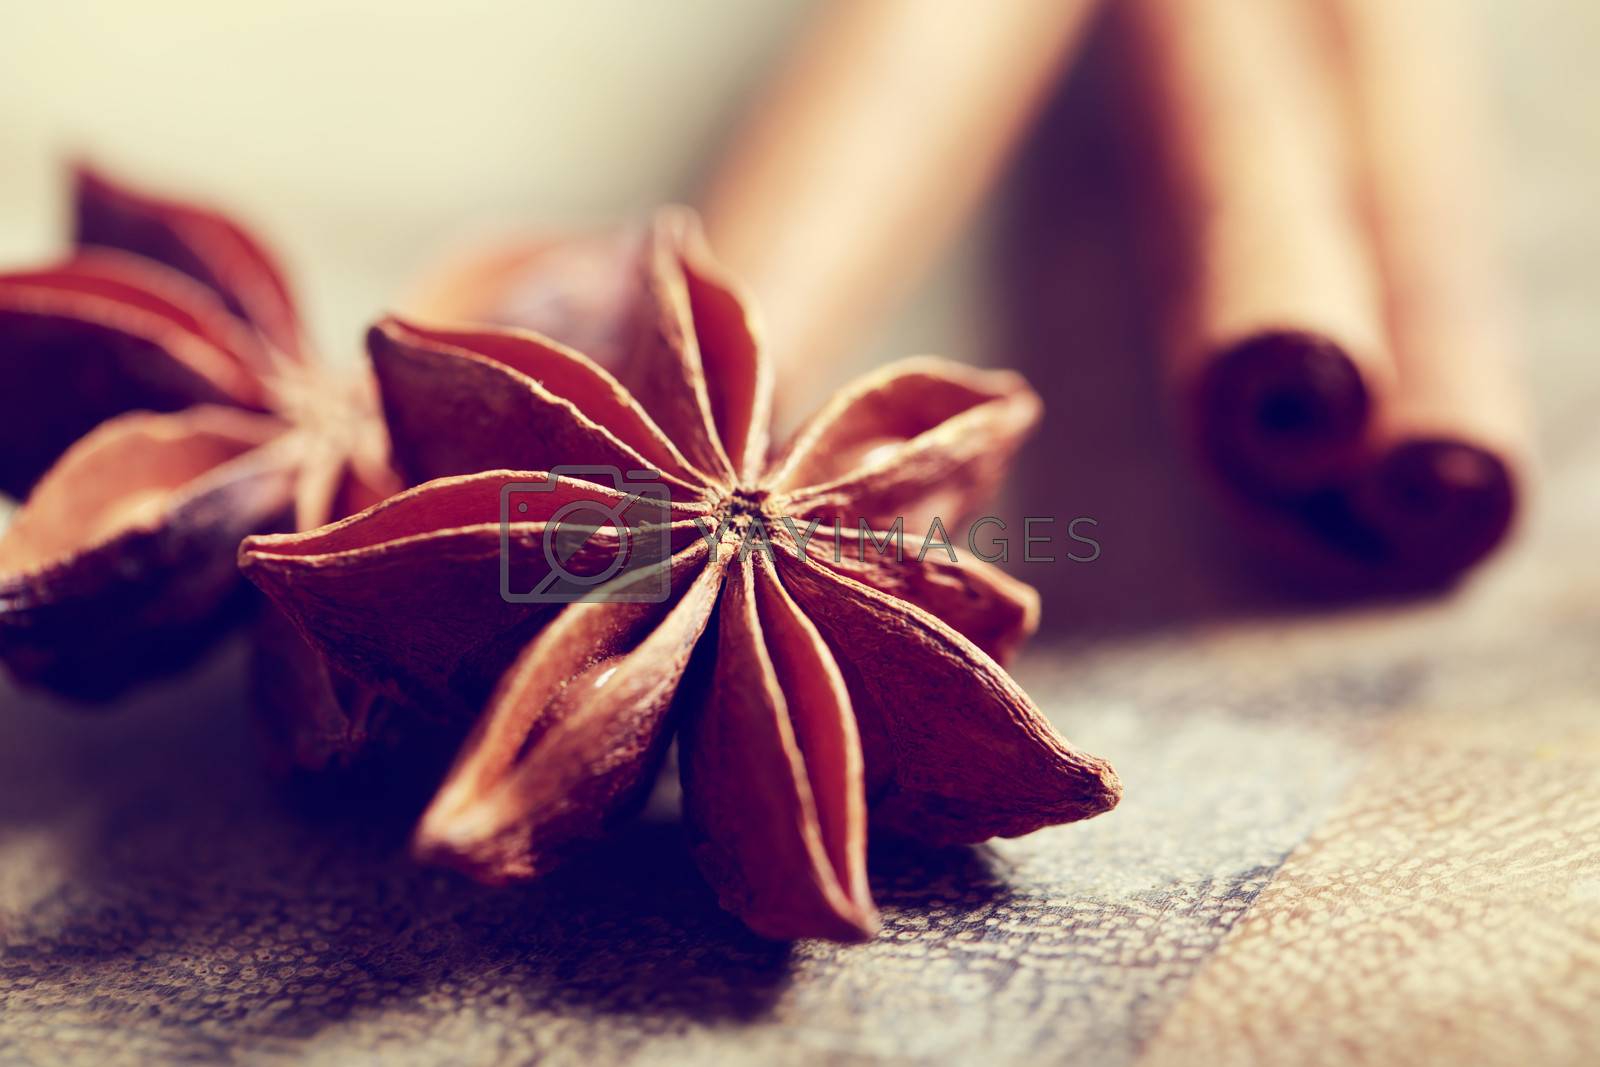 Royalty free image of Star anise with cinnamon sticks by melpomene